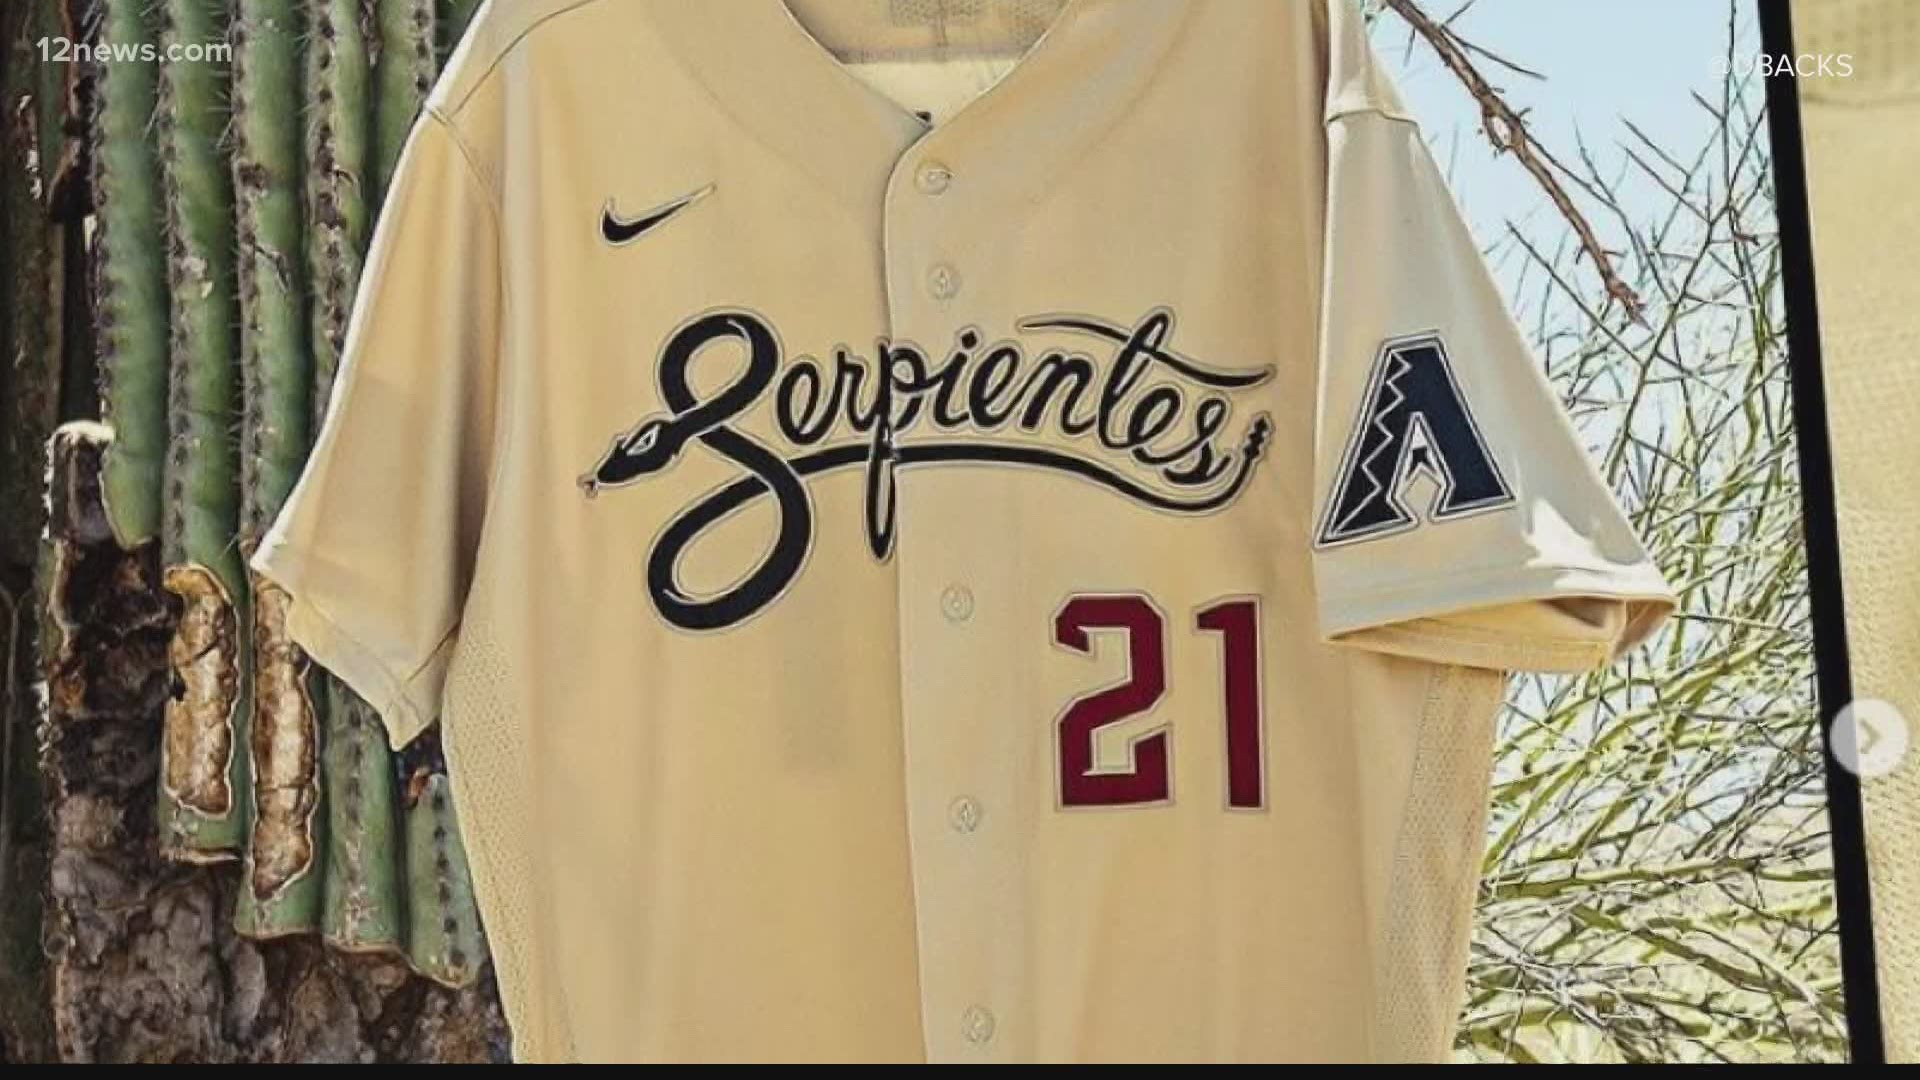 The Arizona Diamondbacks unveiled their new Nike City Connect jerseys on Sunday. The new design features a new color and snake design.